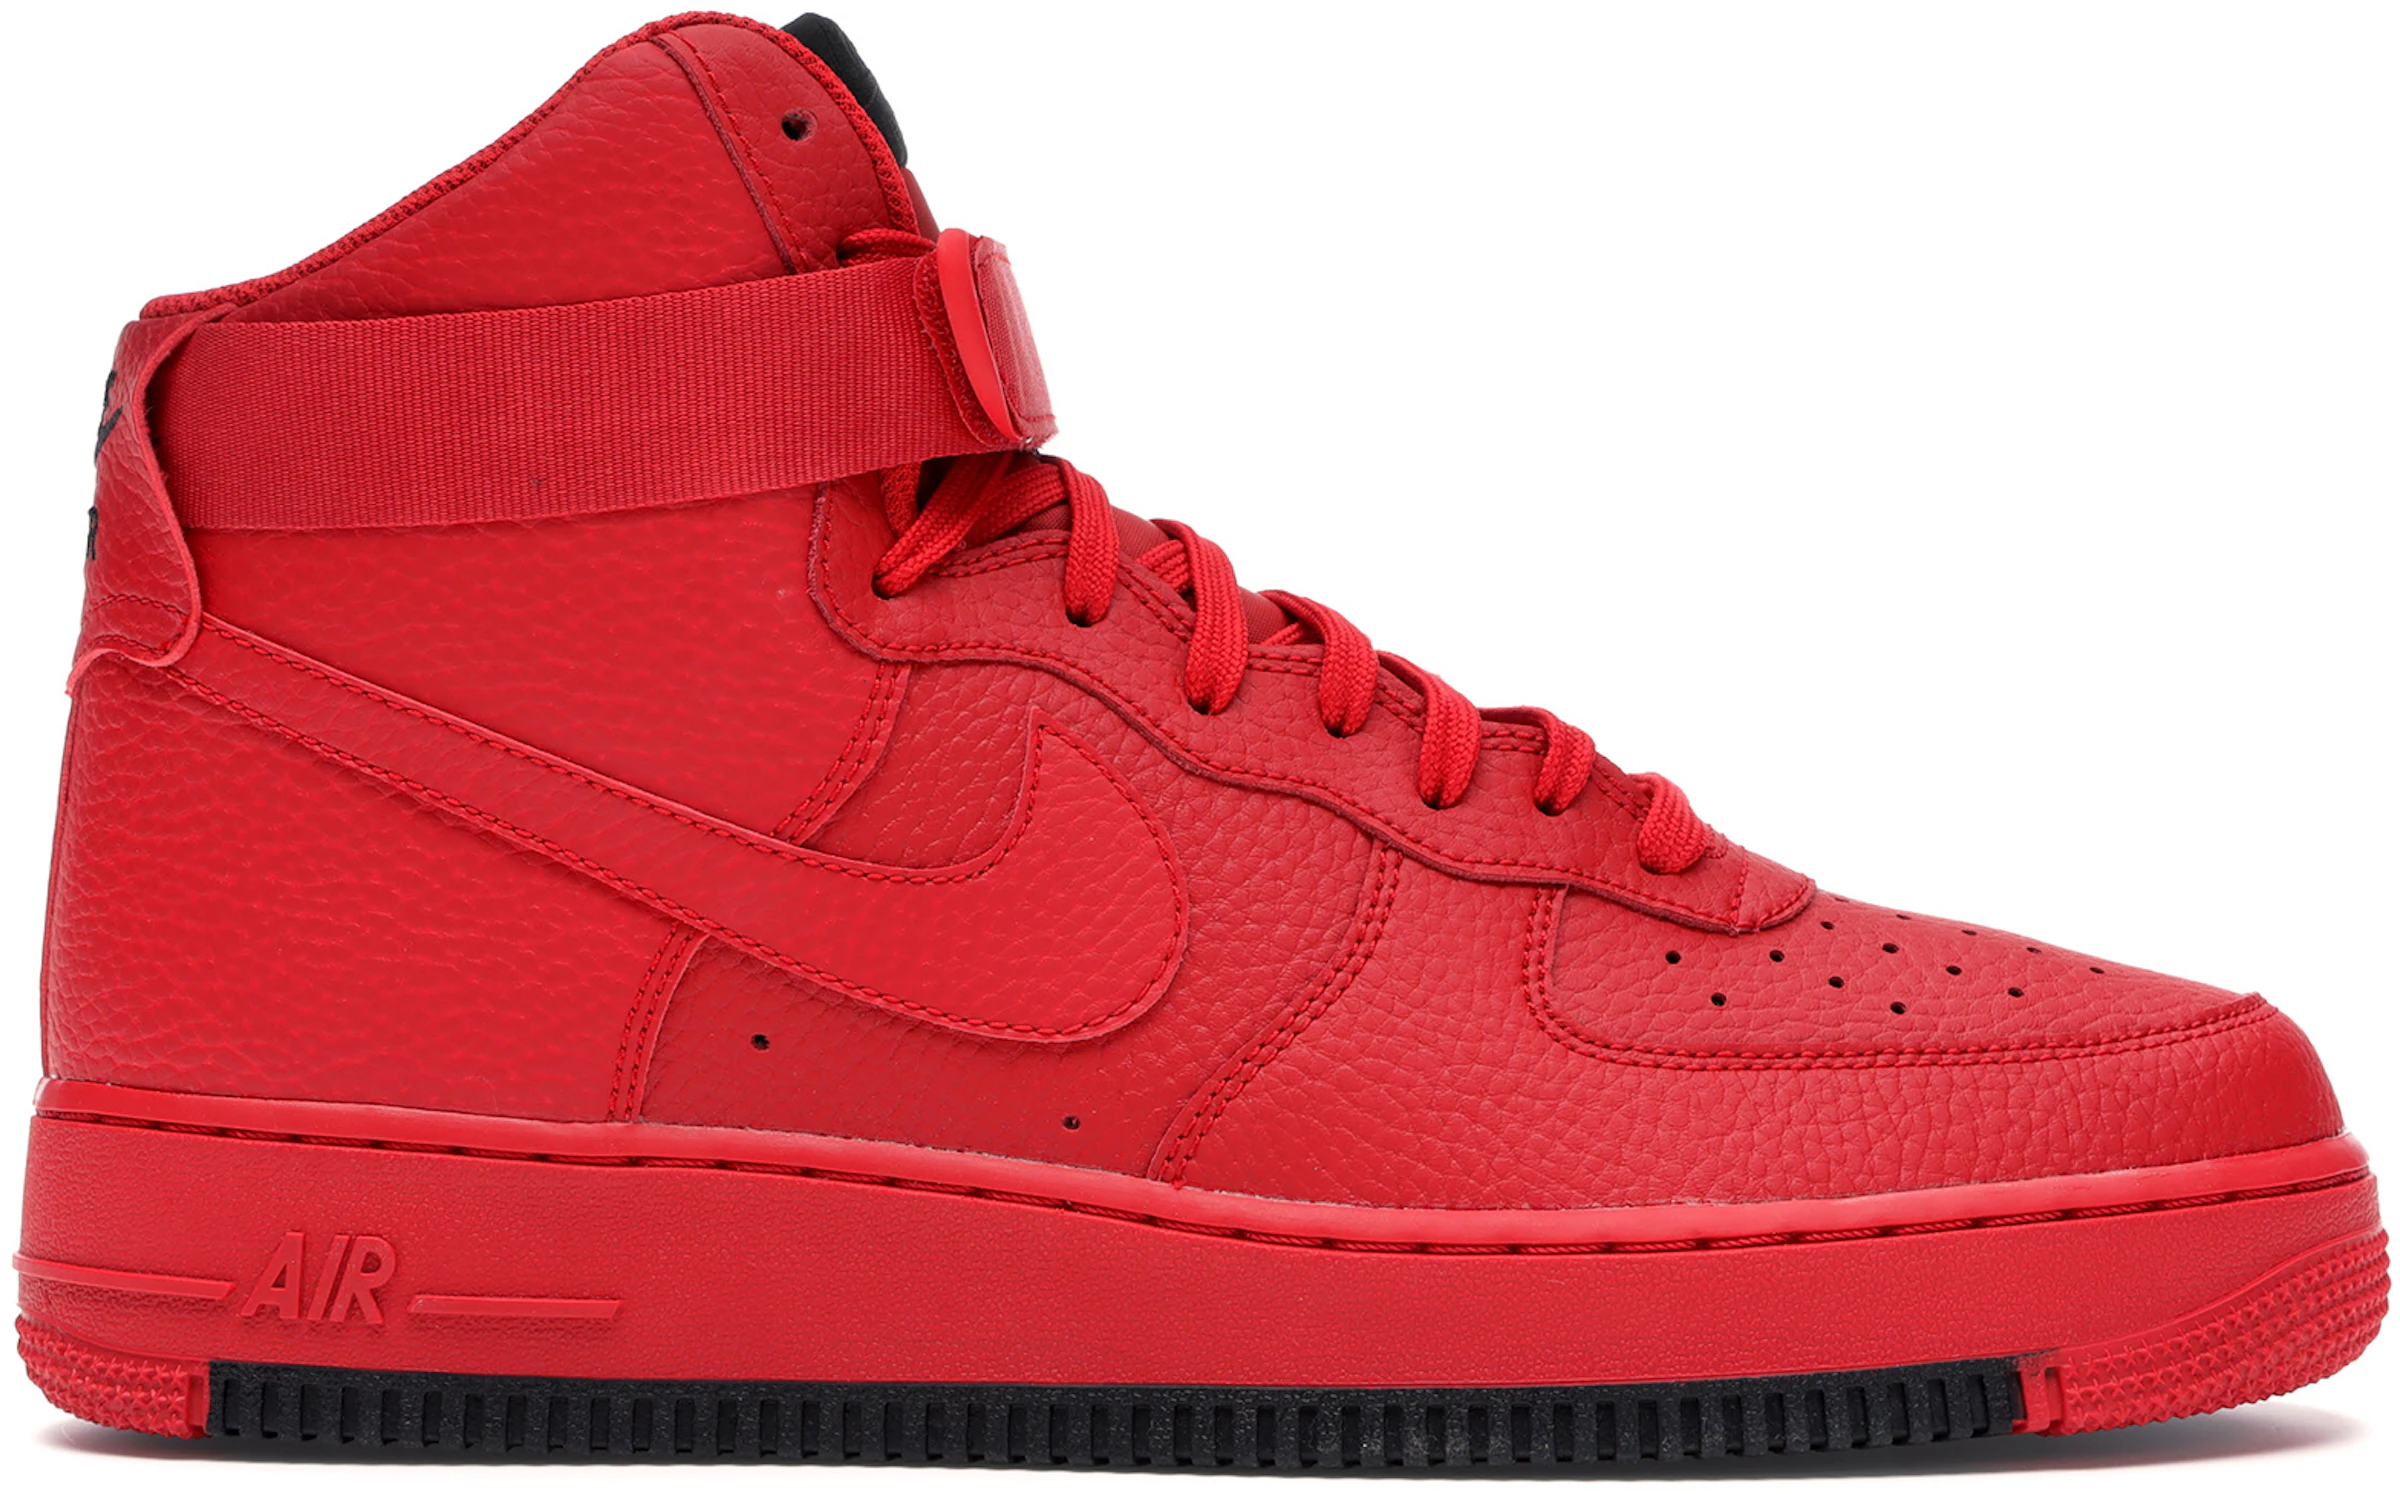 Nike Air Force 1 High University Red Black - AO2440-600 - US